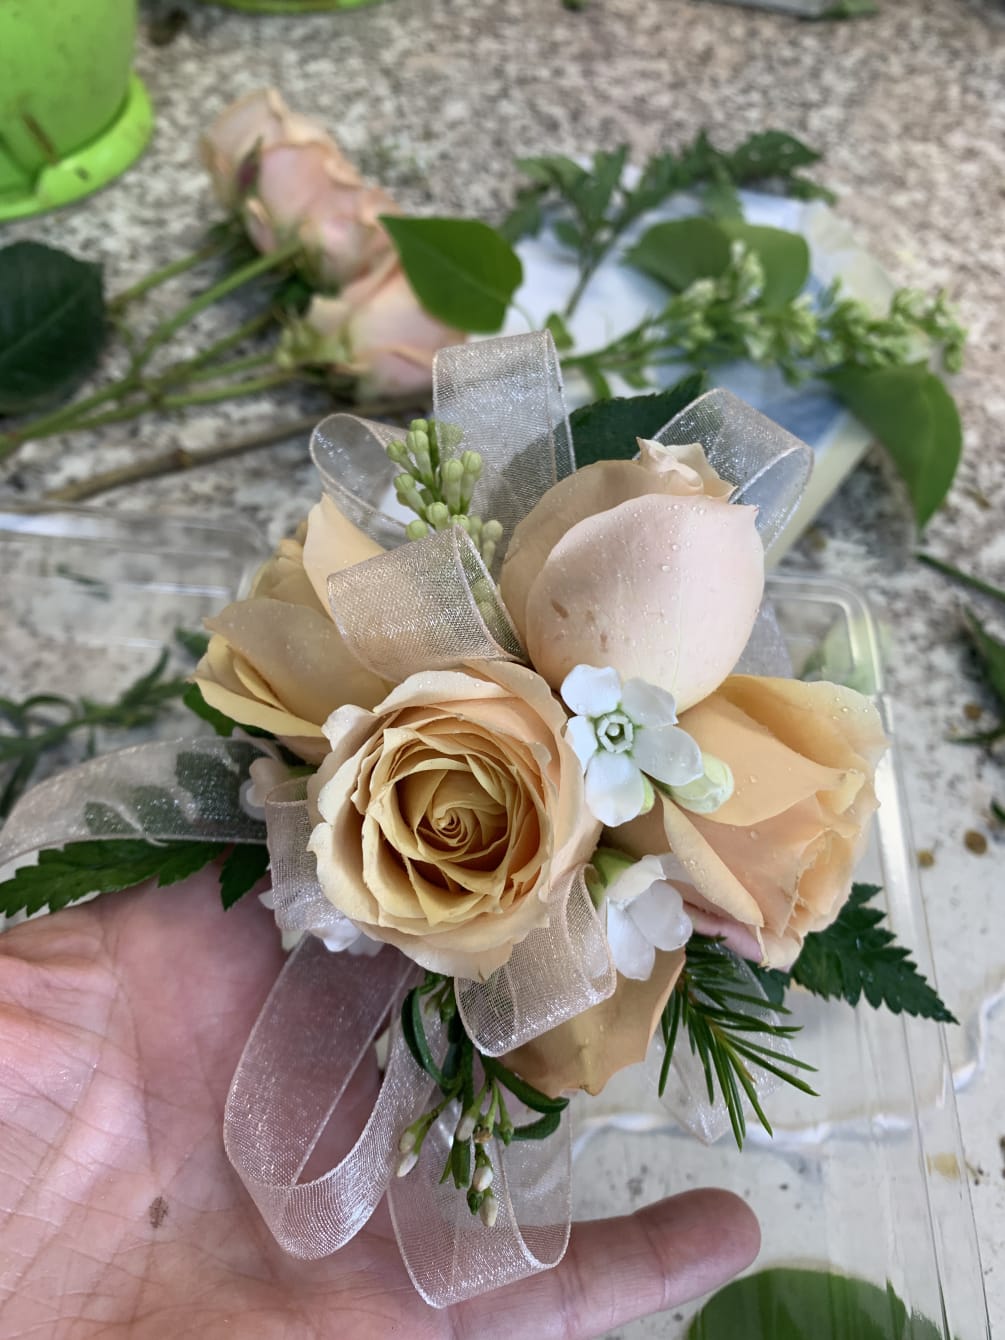 Choose your color rose with silver, gold  or matching ribbon to